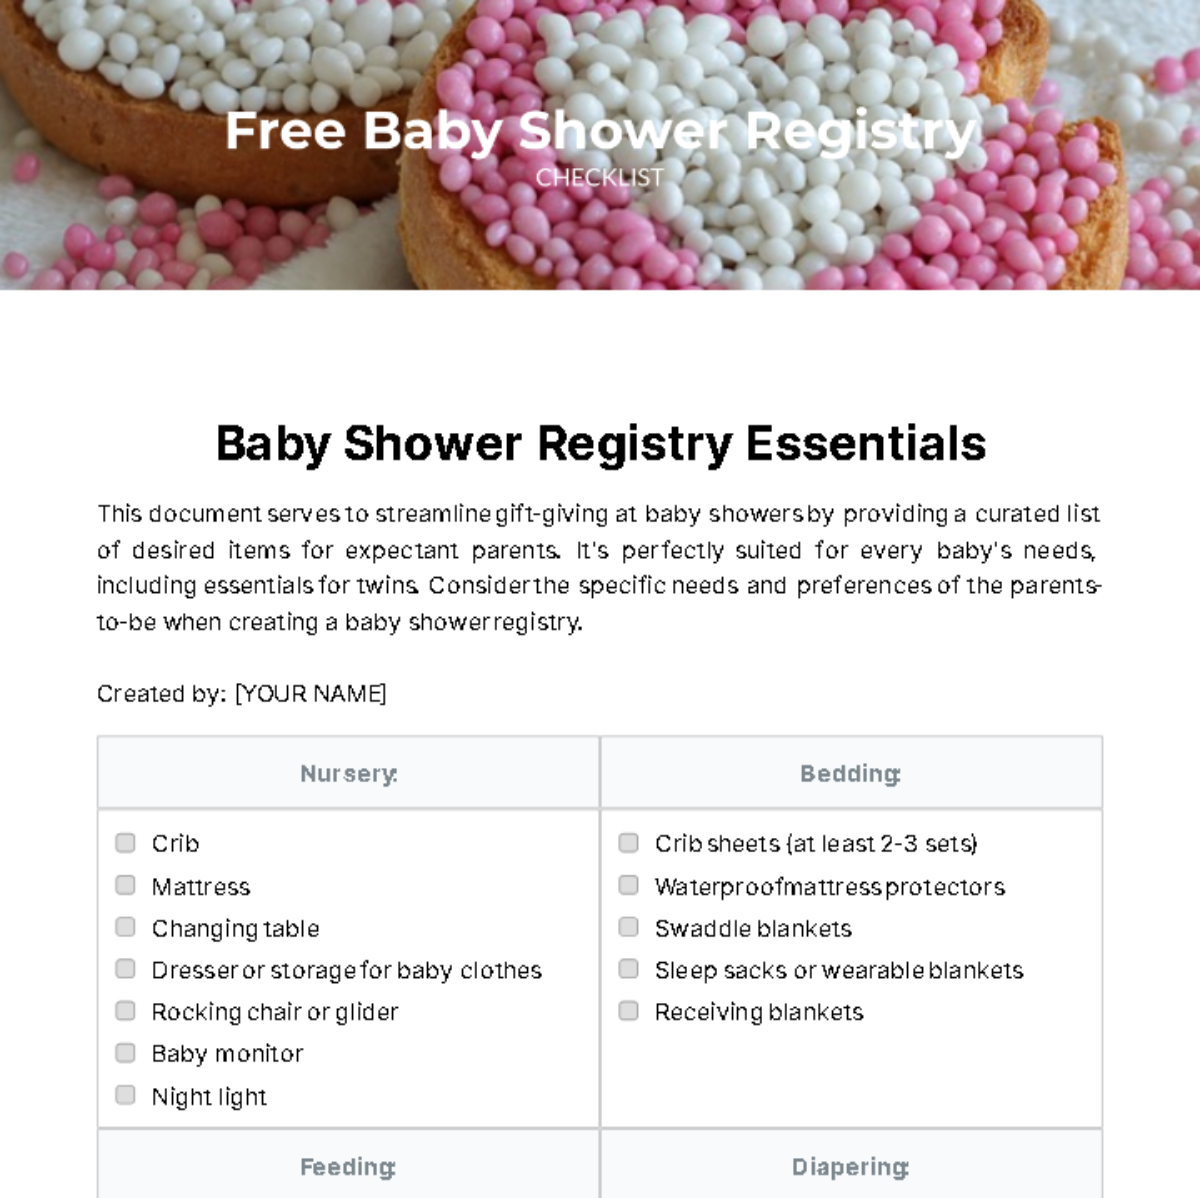 The Only Baby Shower Checklist You Will Need! - Tulamama